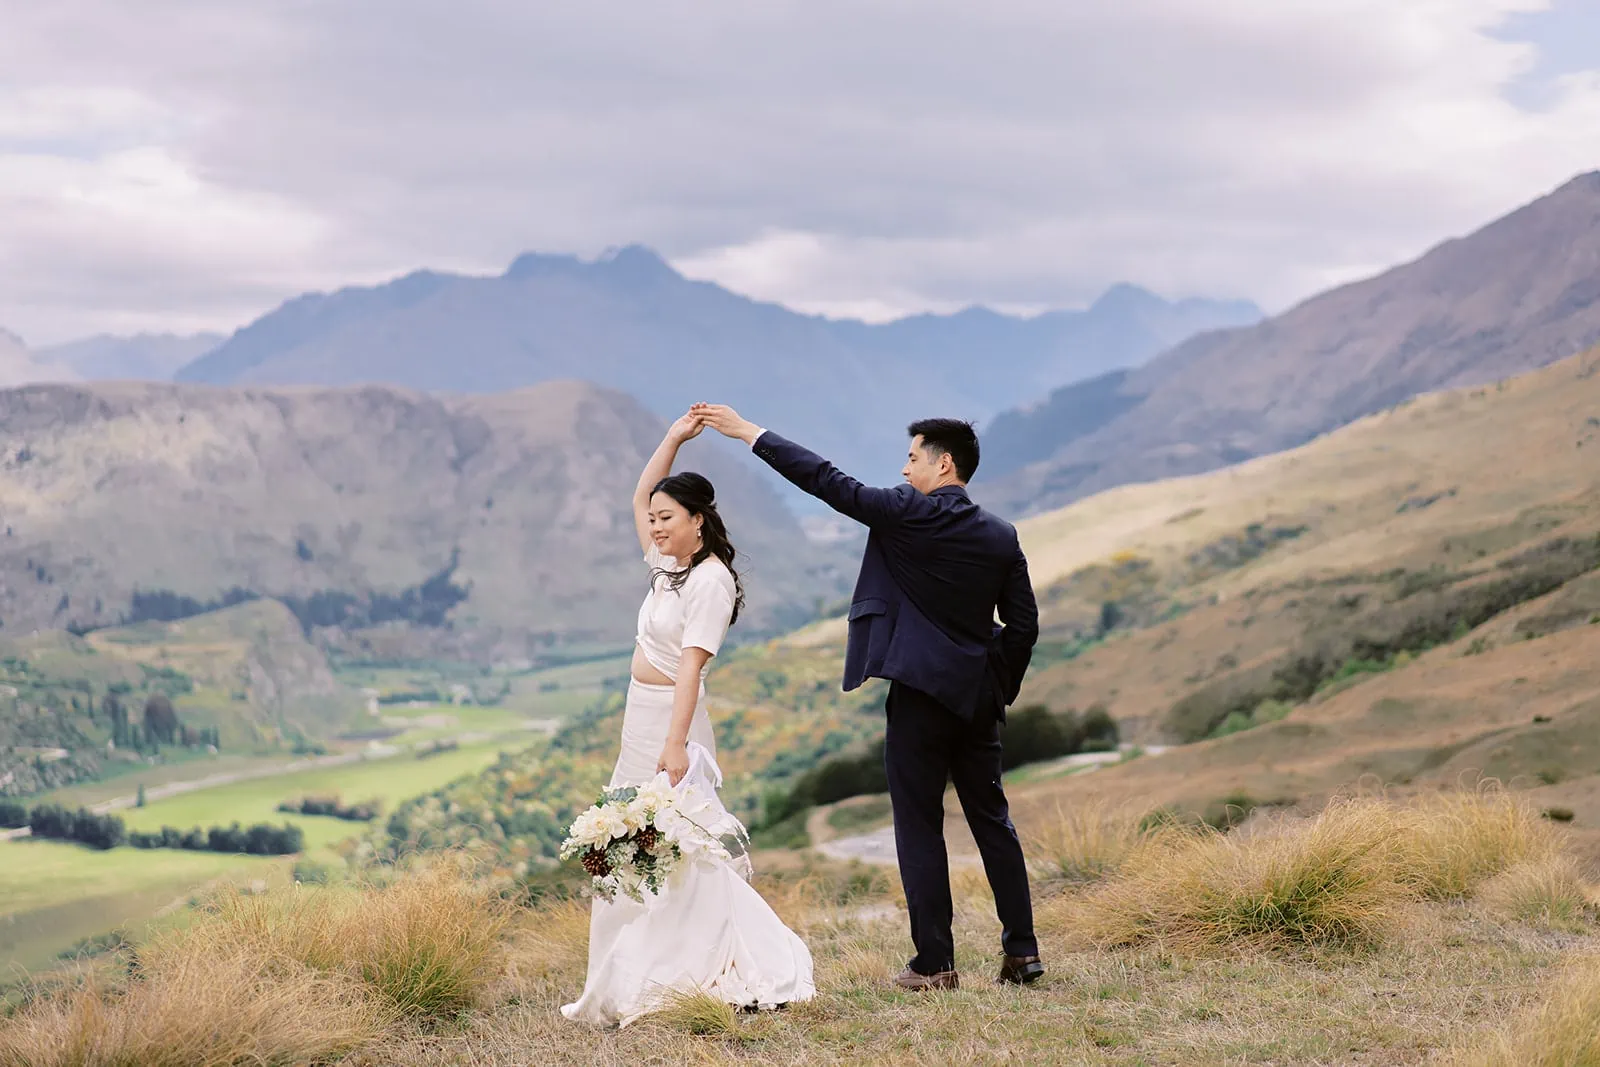 Queenstown Elopement Heli Wedding Photographer クイーンズタウン結婚式 | A breathtaking pre-wedding photoshoot of a bride and groom standing on top of a mountain in New Zealand.